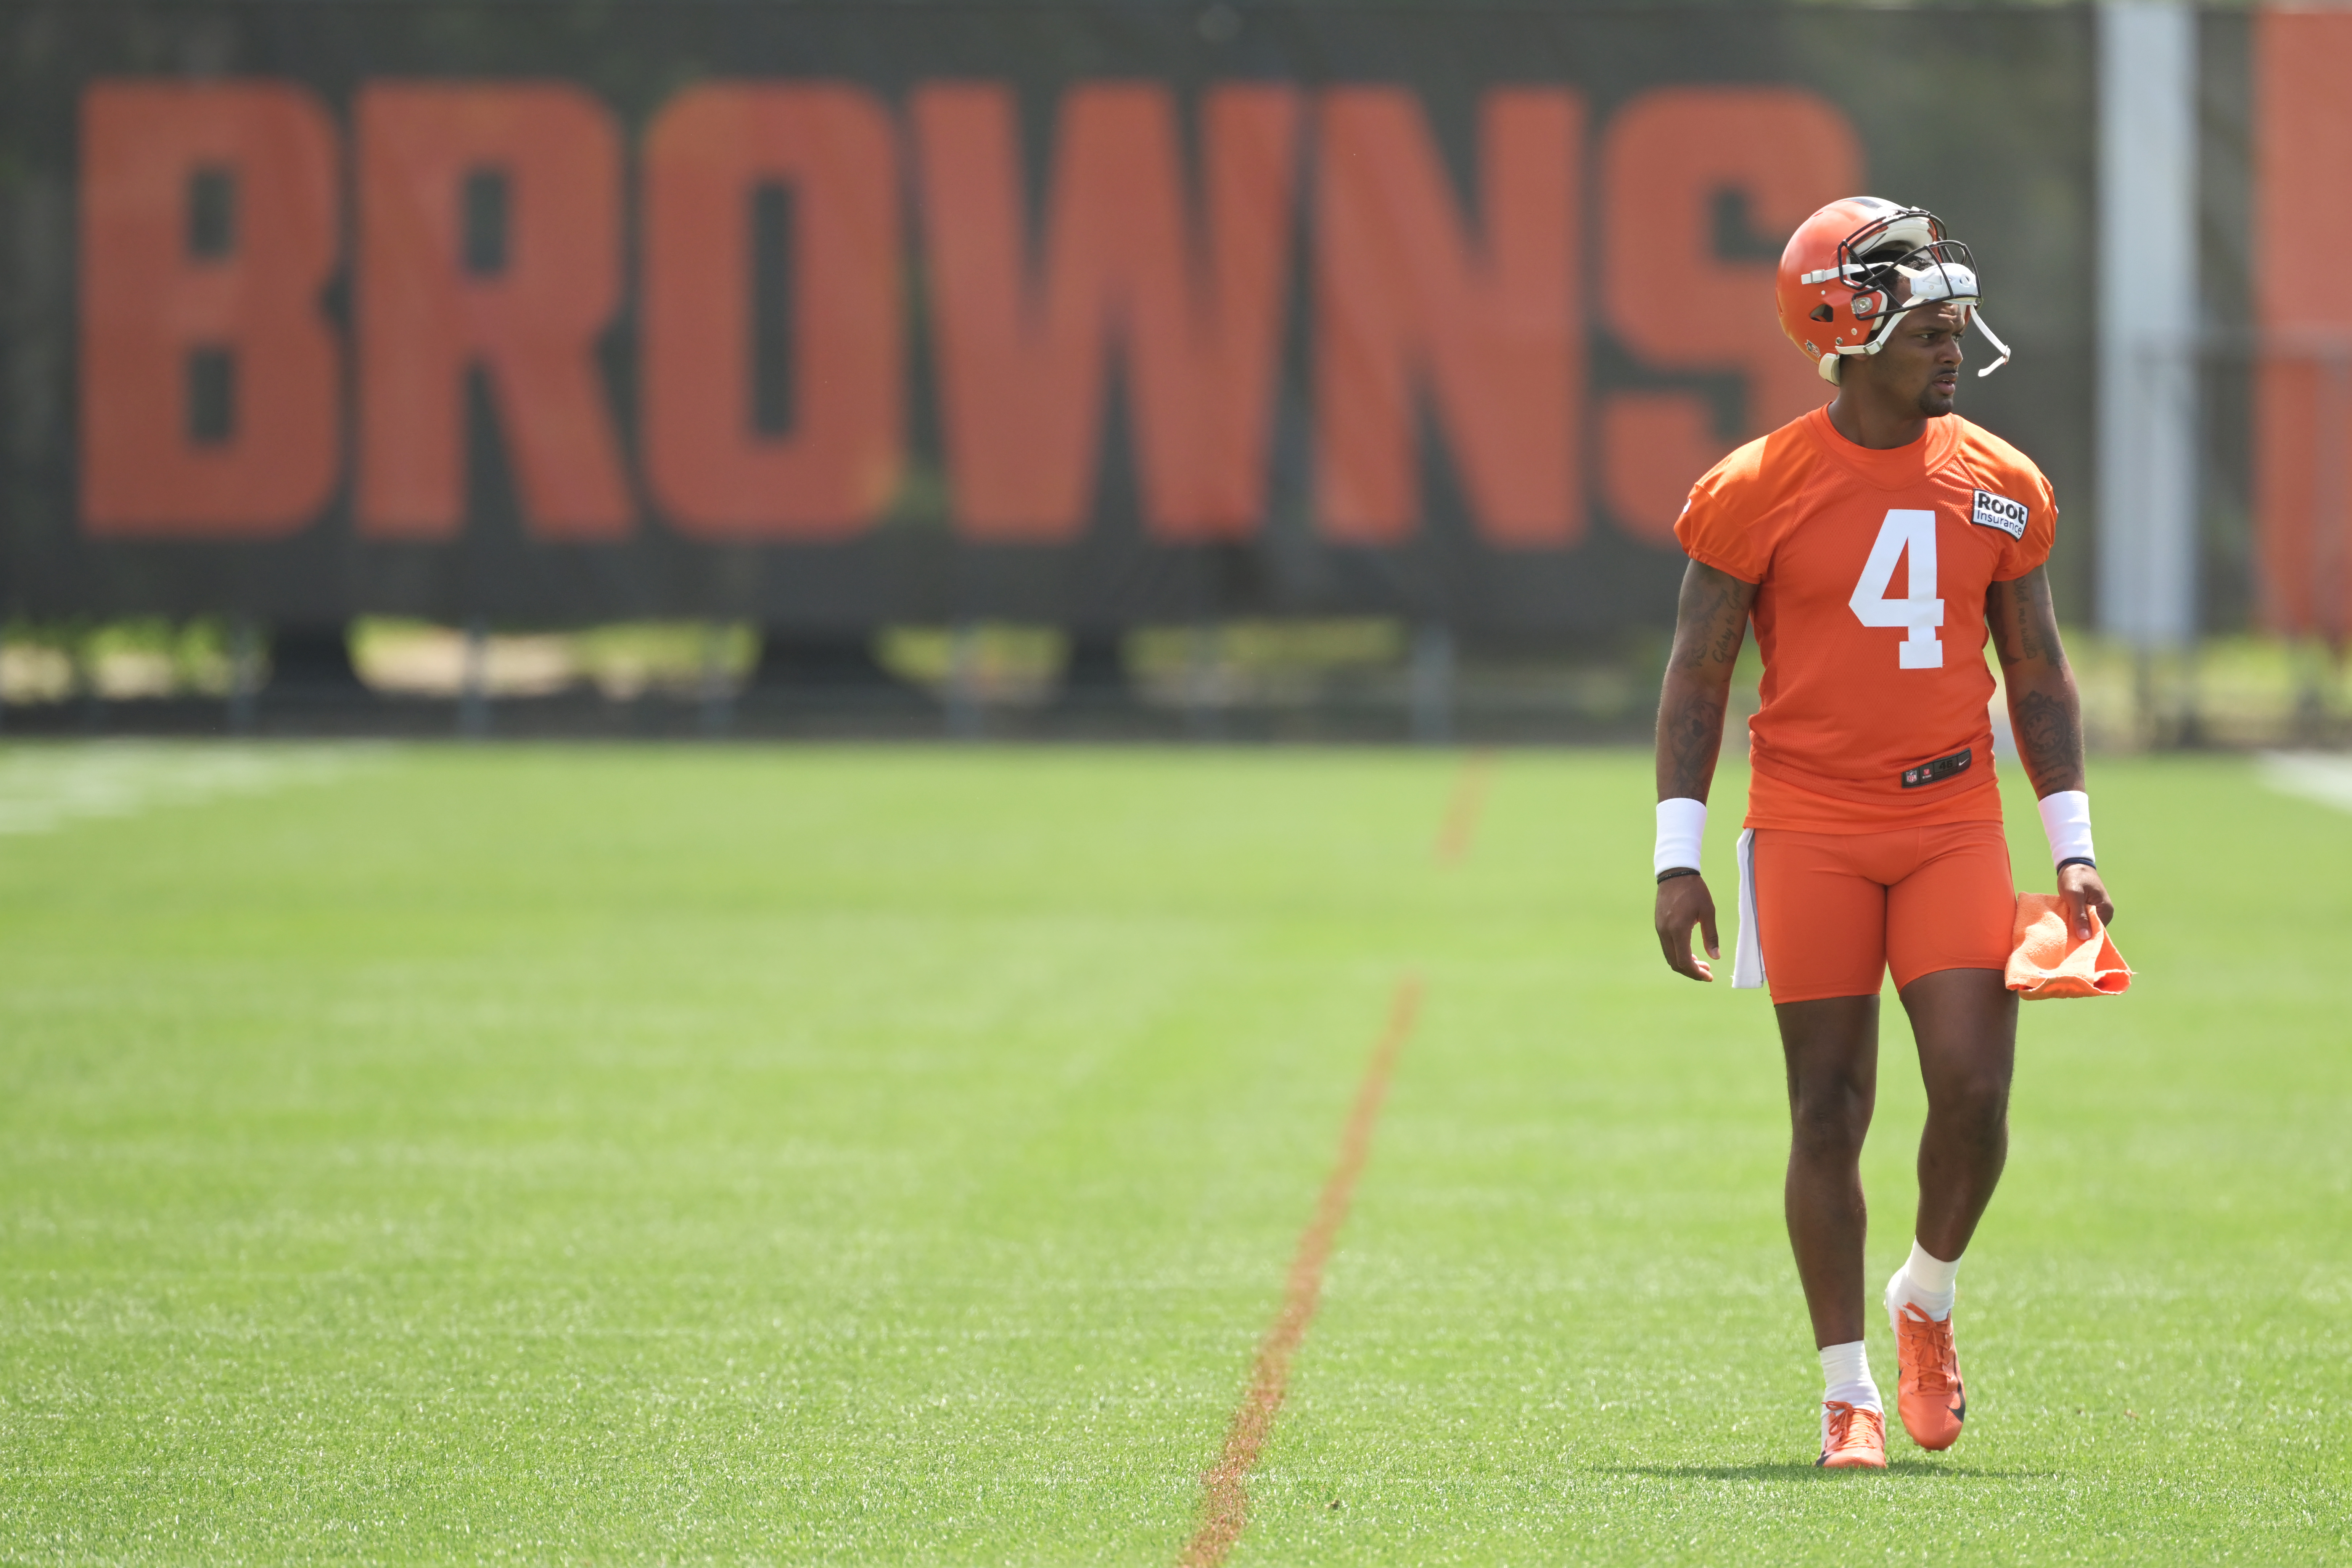 Cleveland Browns not focused on Deshaun Watson as training camp opens